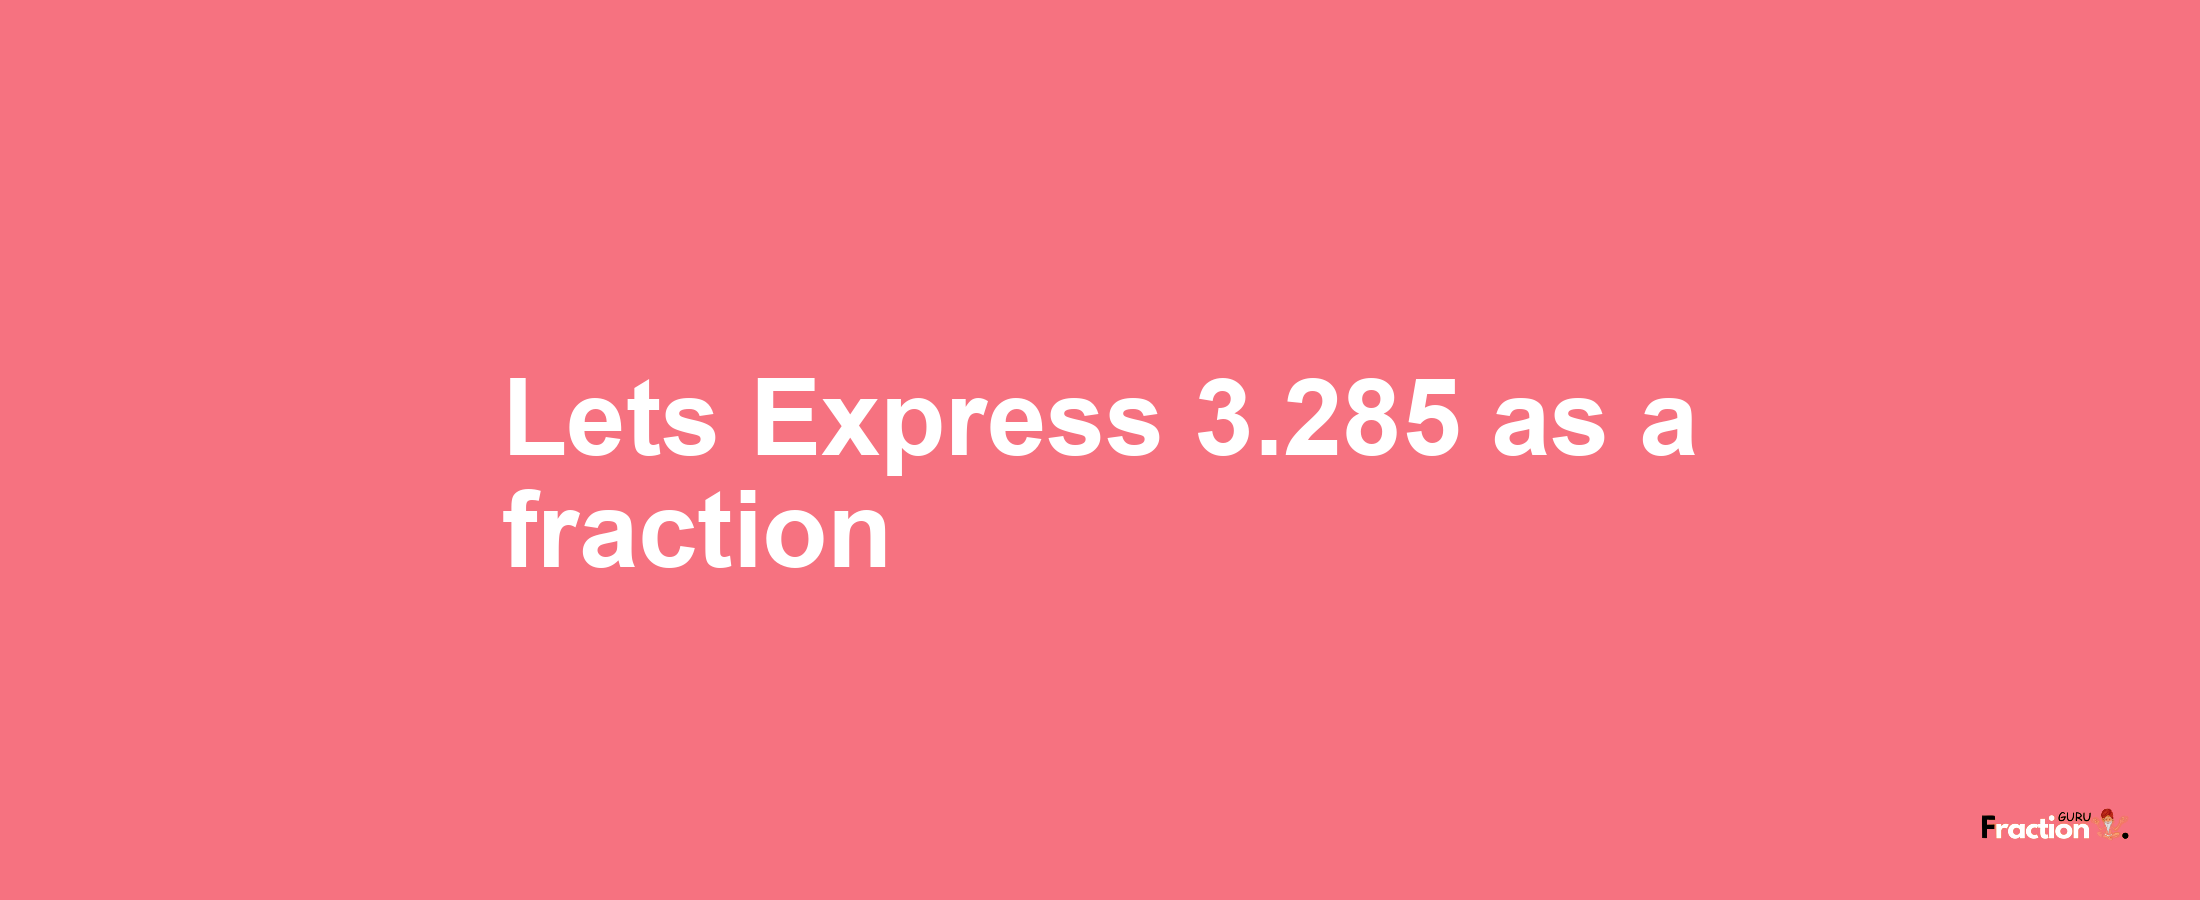 Lets Express 3.285 as afraction